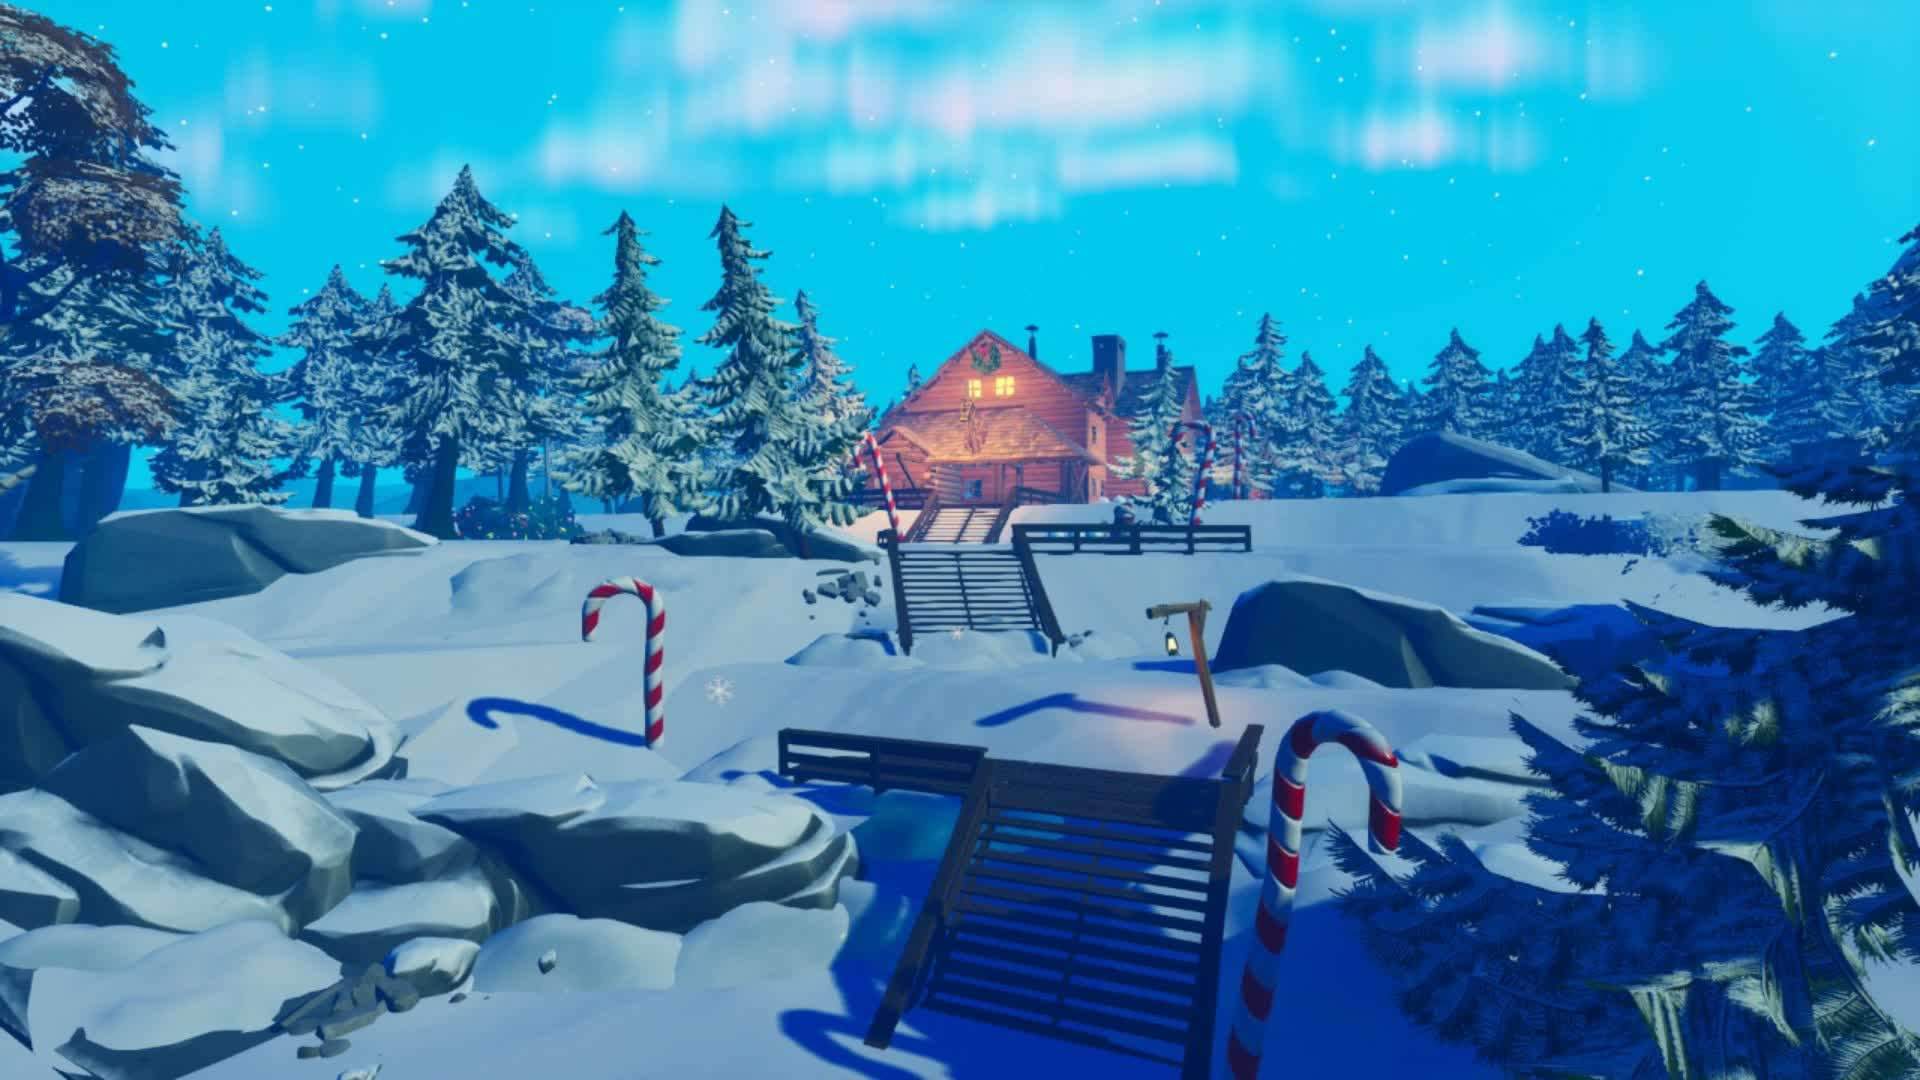 CHRISTMAS CABIN-FREE FOR ALL